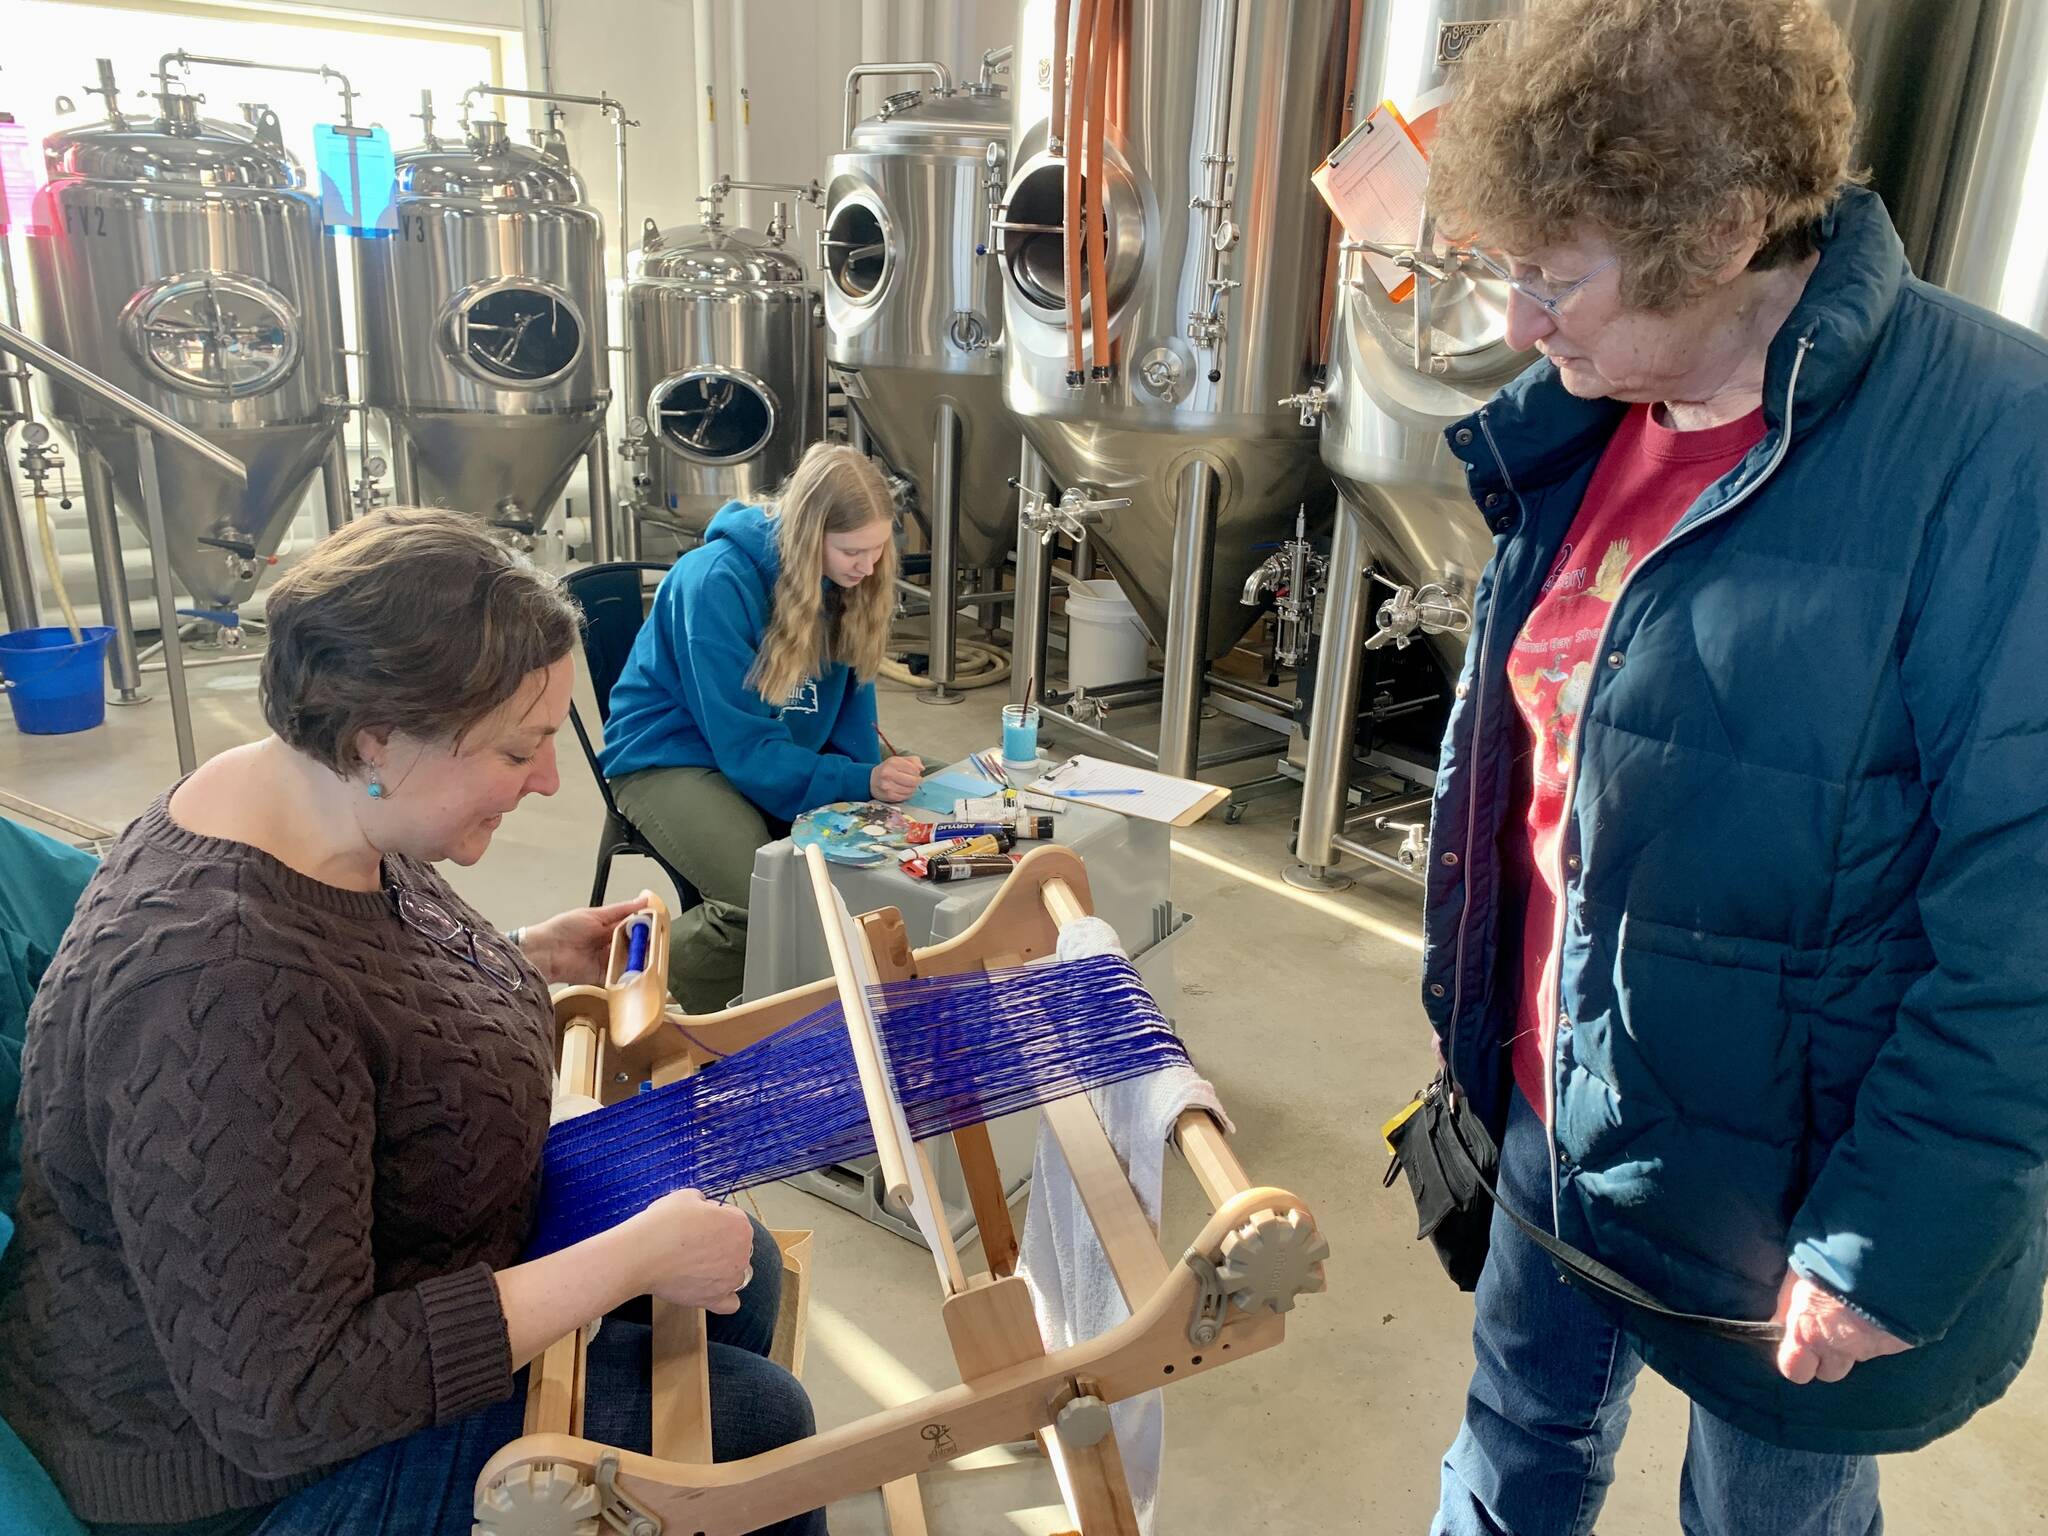 Janet Higley, right, looks on while Lisa Talbott weaves and Leah Dunn, rear center, paints during the Ptarmigan Arts scholarship fundraiser at Grace Ridge Brewing on Saturday. (Photo by Christina Whiting/Homer News)